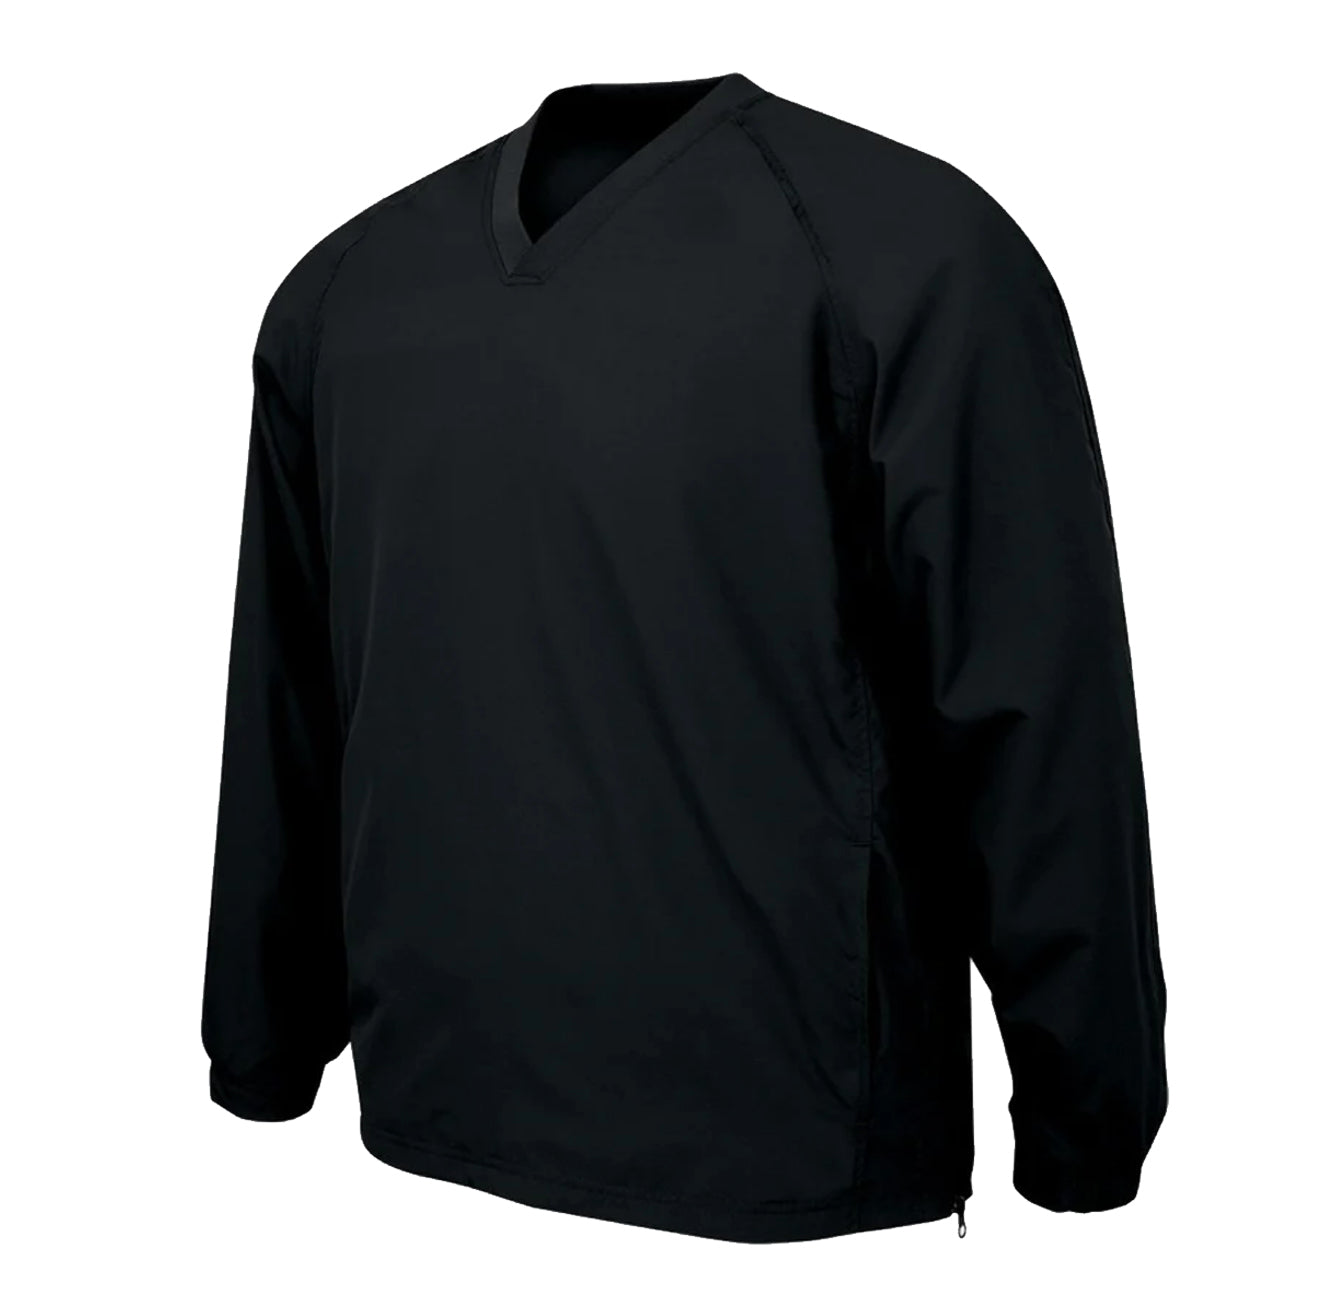 Spectrum Windshirt - Adult - Youth Sports Products